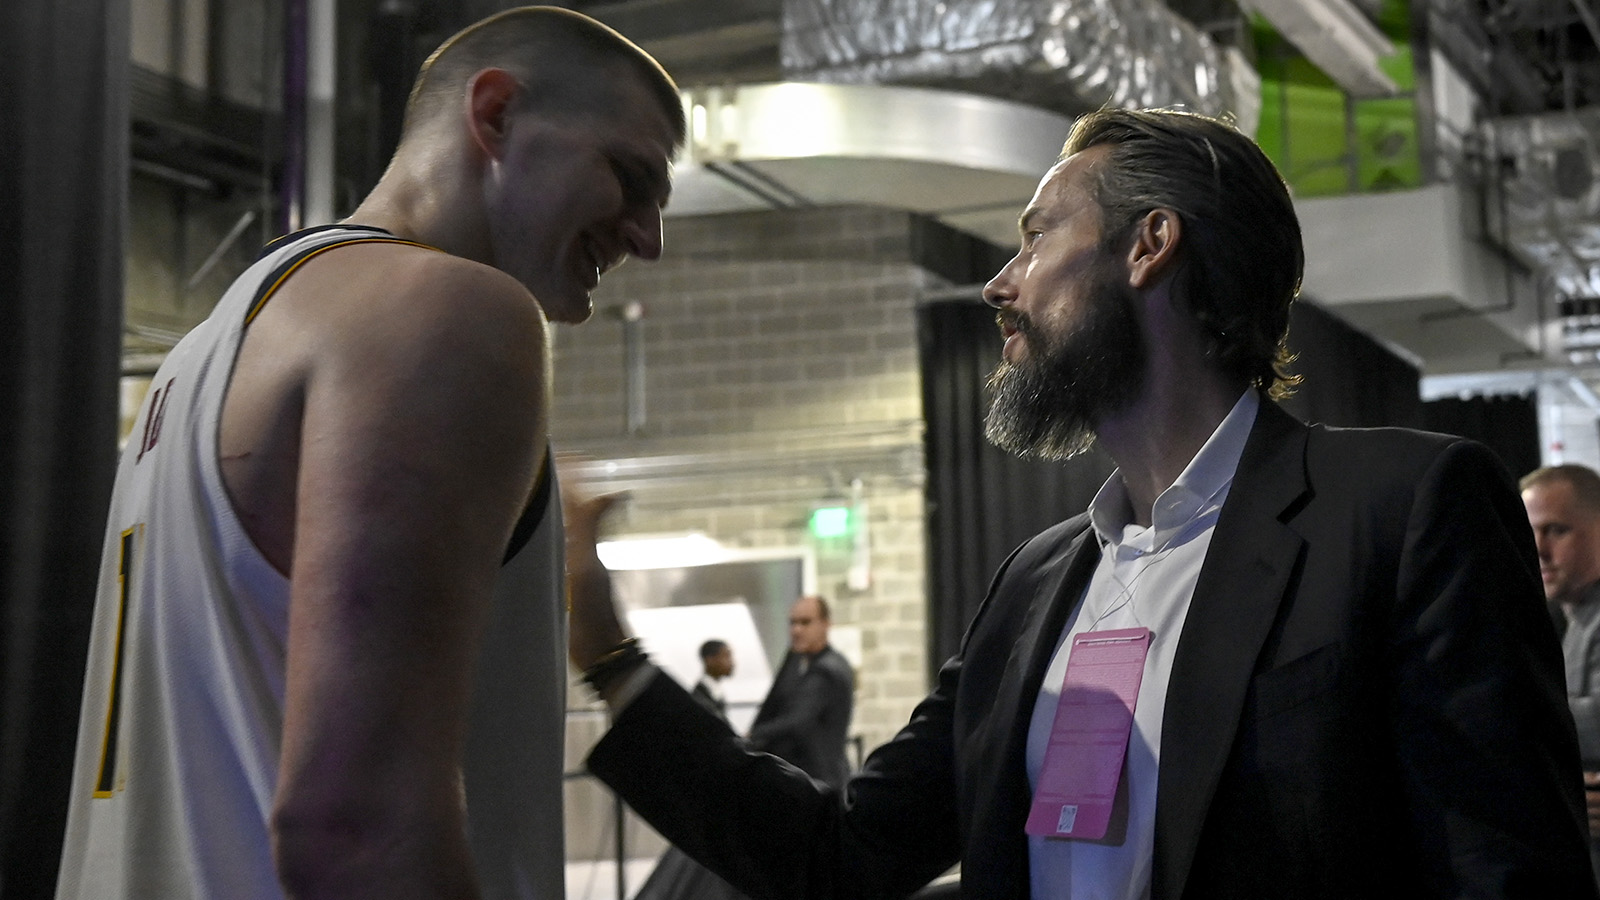 Nikola Jokic of the Denver Nuggets is greeted by Josh Kroenke at Chase Center on April 27, 2022.